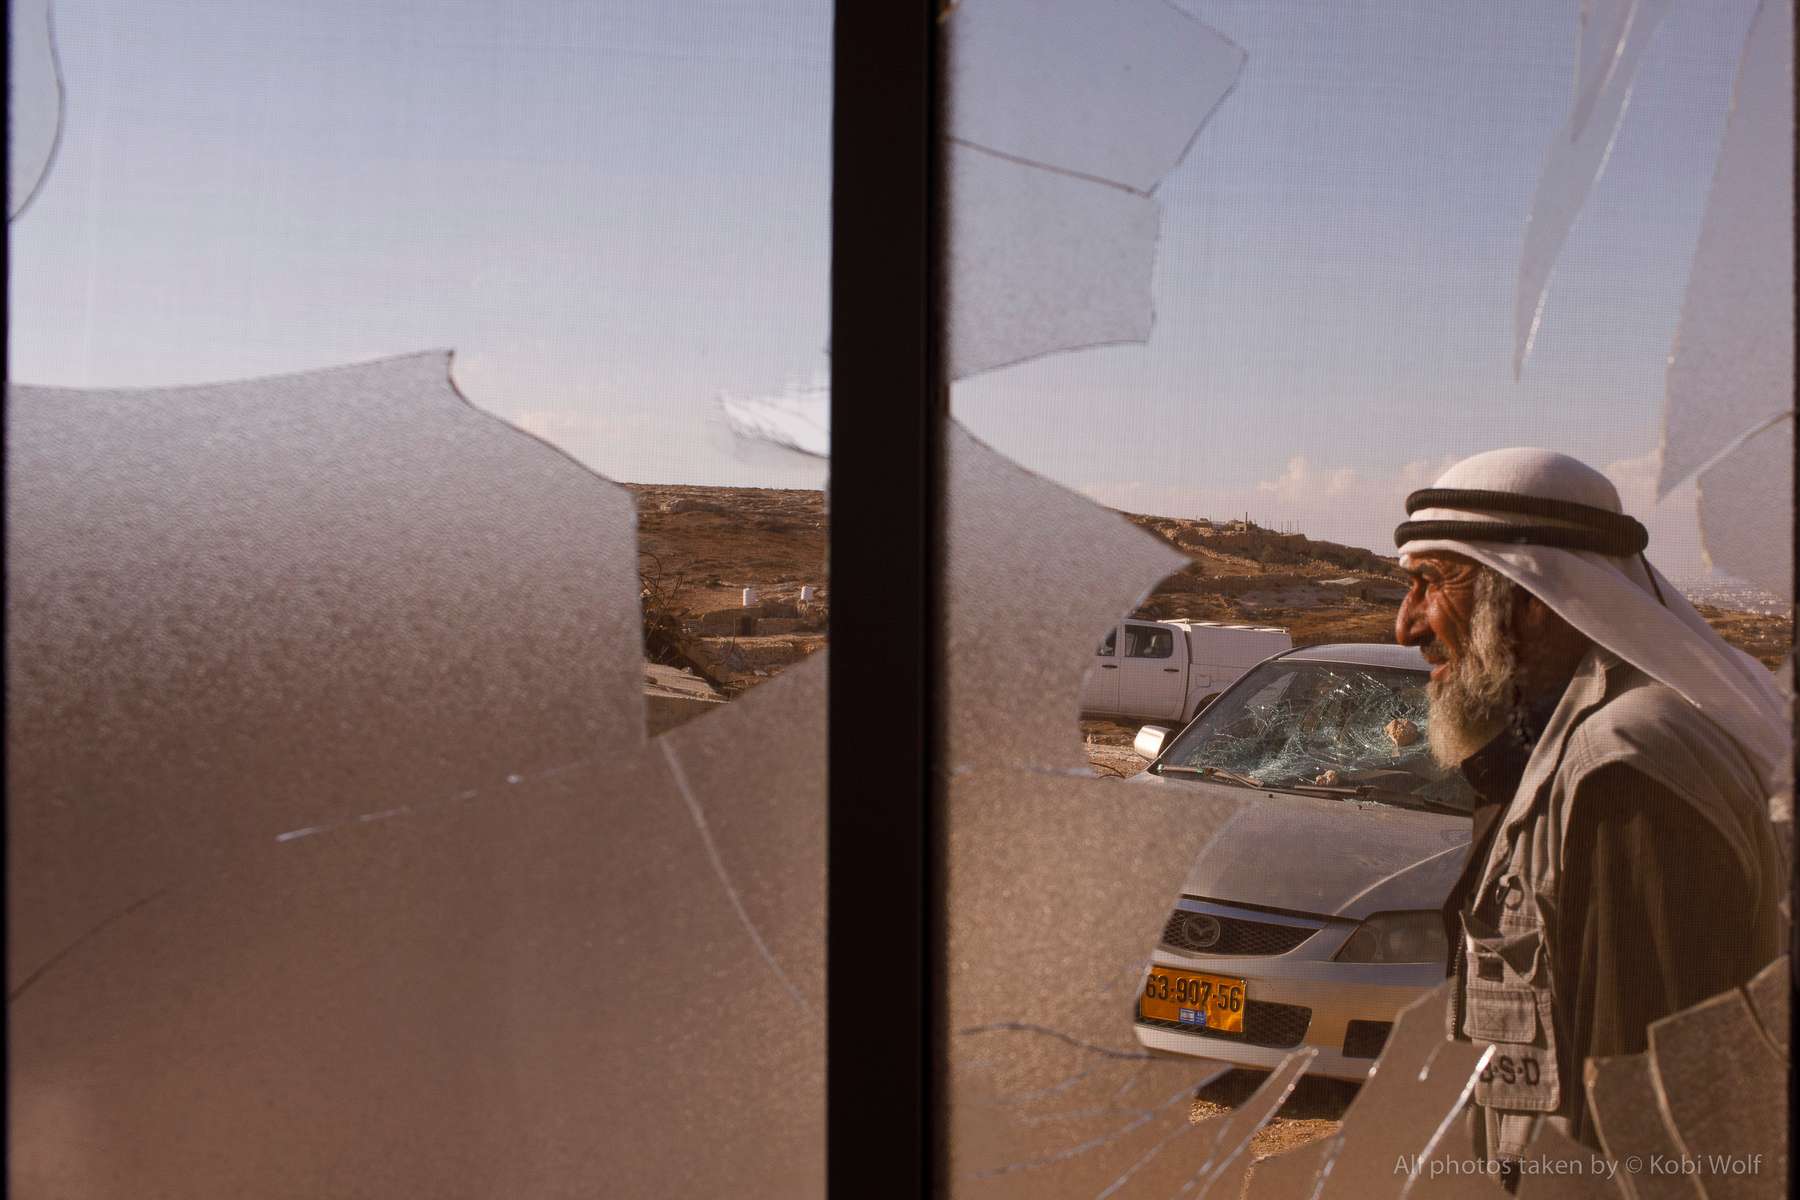 Mahmoud Hussein Hamamdeh, grandfather of the wounded child (Mohammed) as seen from a broken window cause by the attach of Jewish settlers In Al Mufkara village, South hill Hebron, West Bank on Wednesday September 29, 2021 photographer: Kobi Wolf for NRC